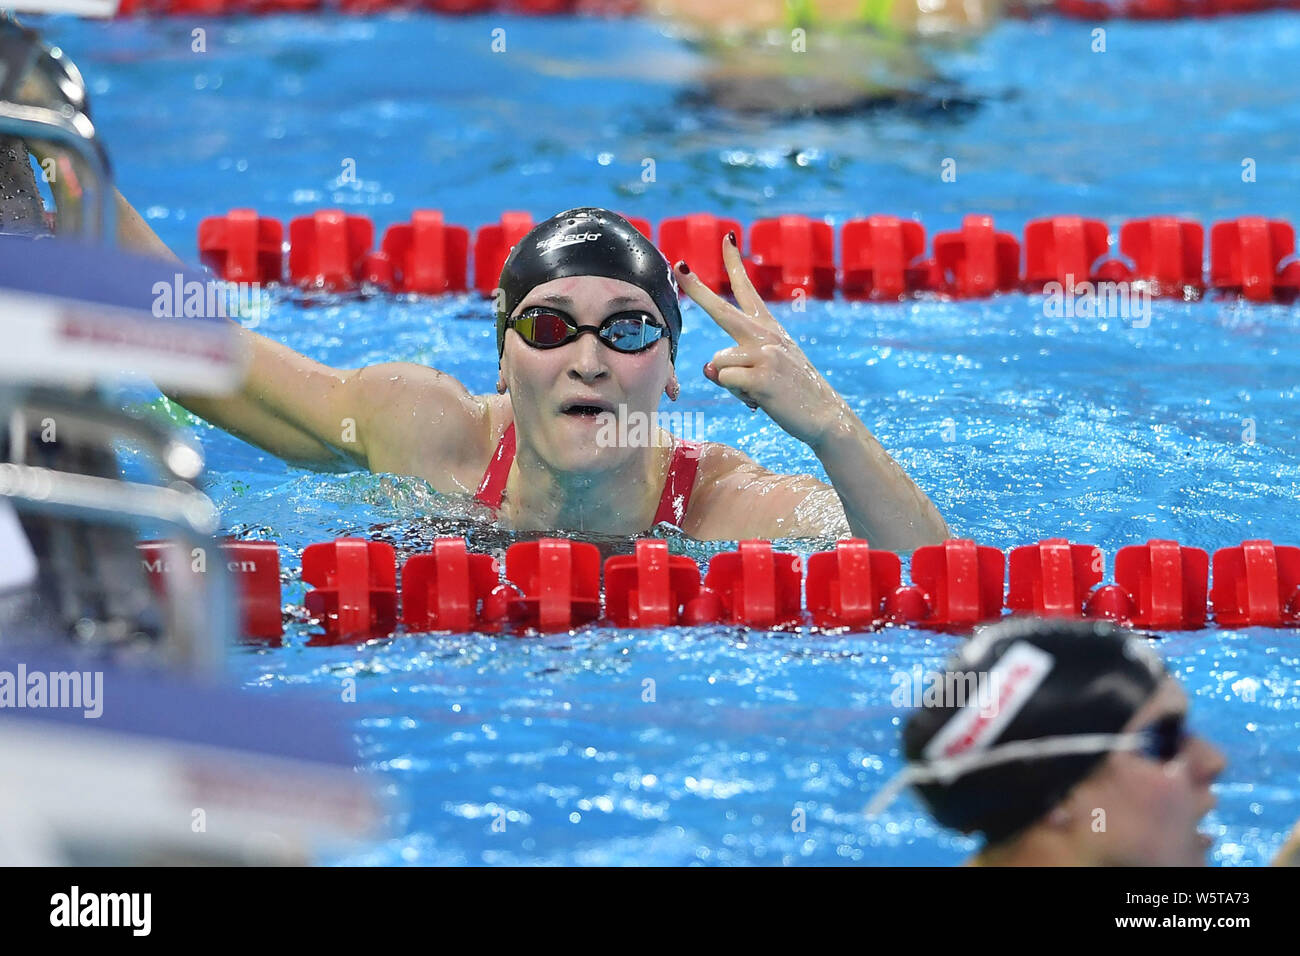 Annie Lazor of the USA celebrates after winning the Women's 200m Breaststroke Final at the 14th FINA World Swimming Championships (25m) in Hangzhou ci Stock Photo